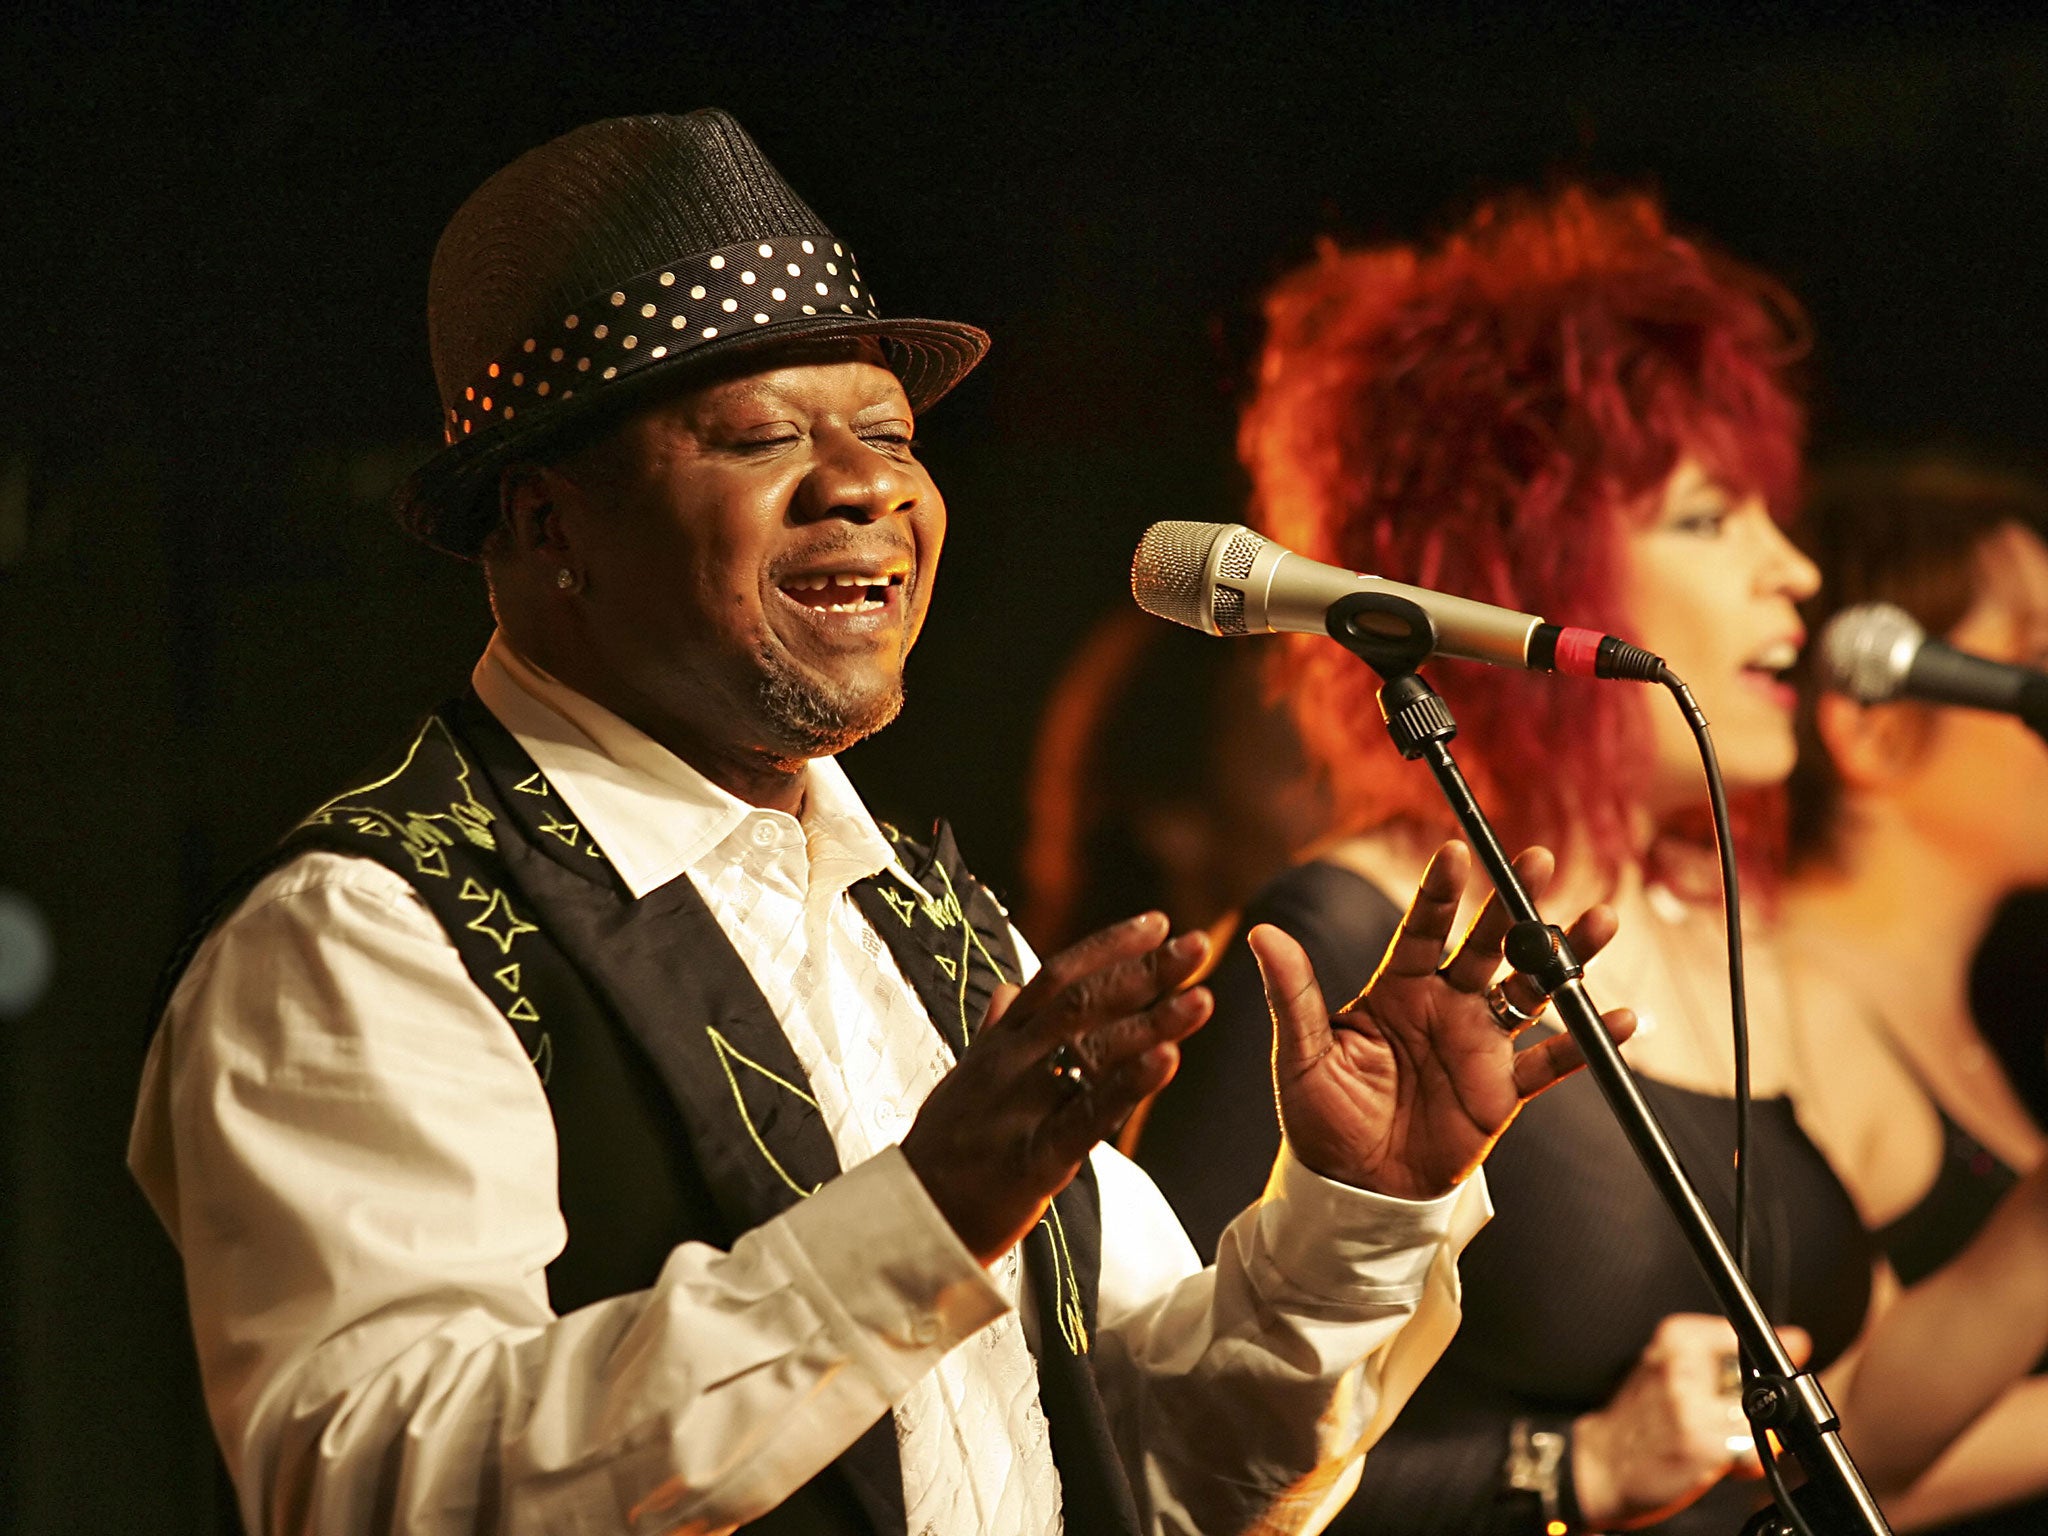 Congolese singer Papa Wemba performs during a concert at the New Morning, 15 February 2006 in Paris